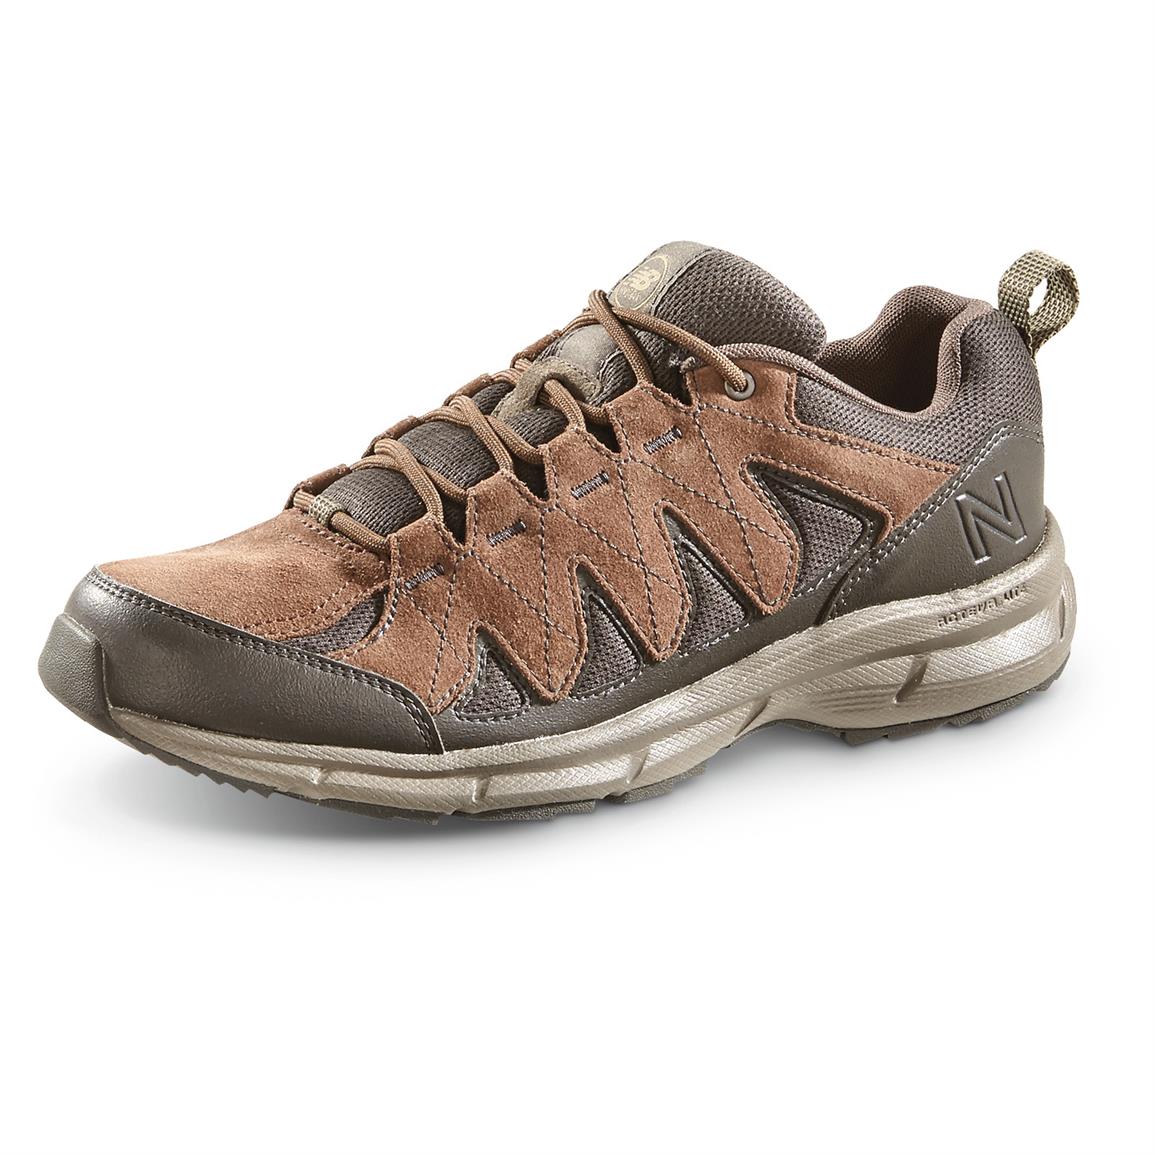 New Balance Men's MW799 Trail Walking Shoes - 665324, Casual Shoes at ...